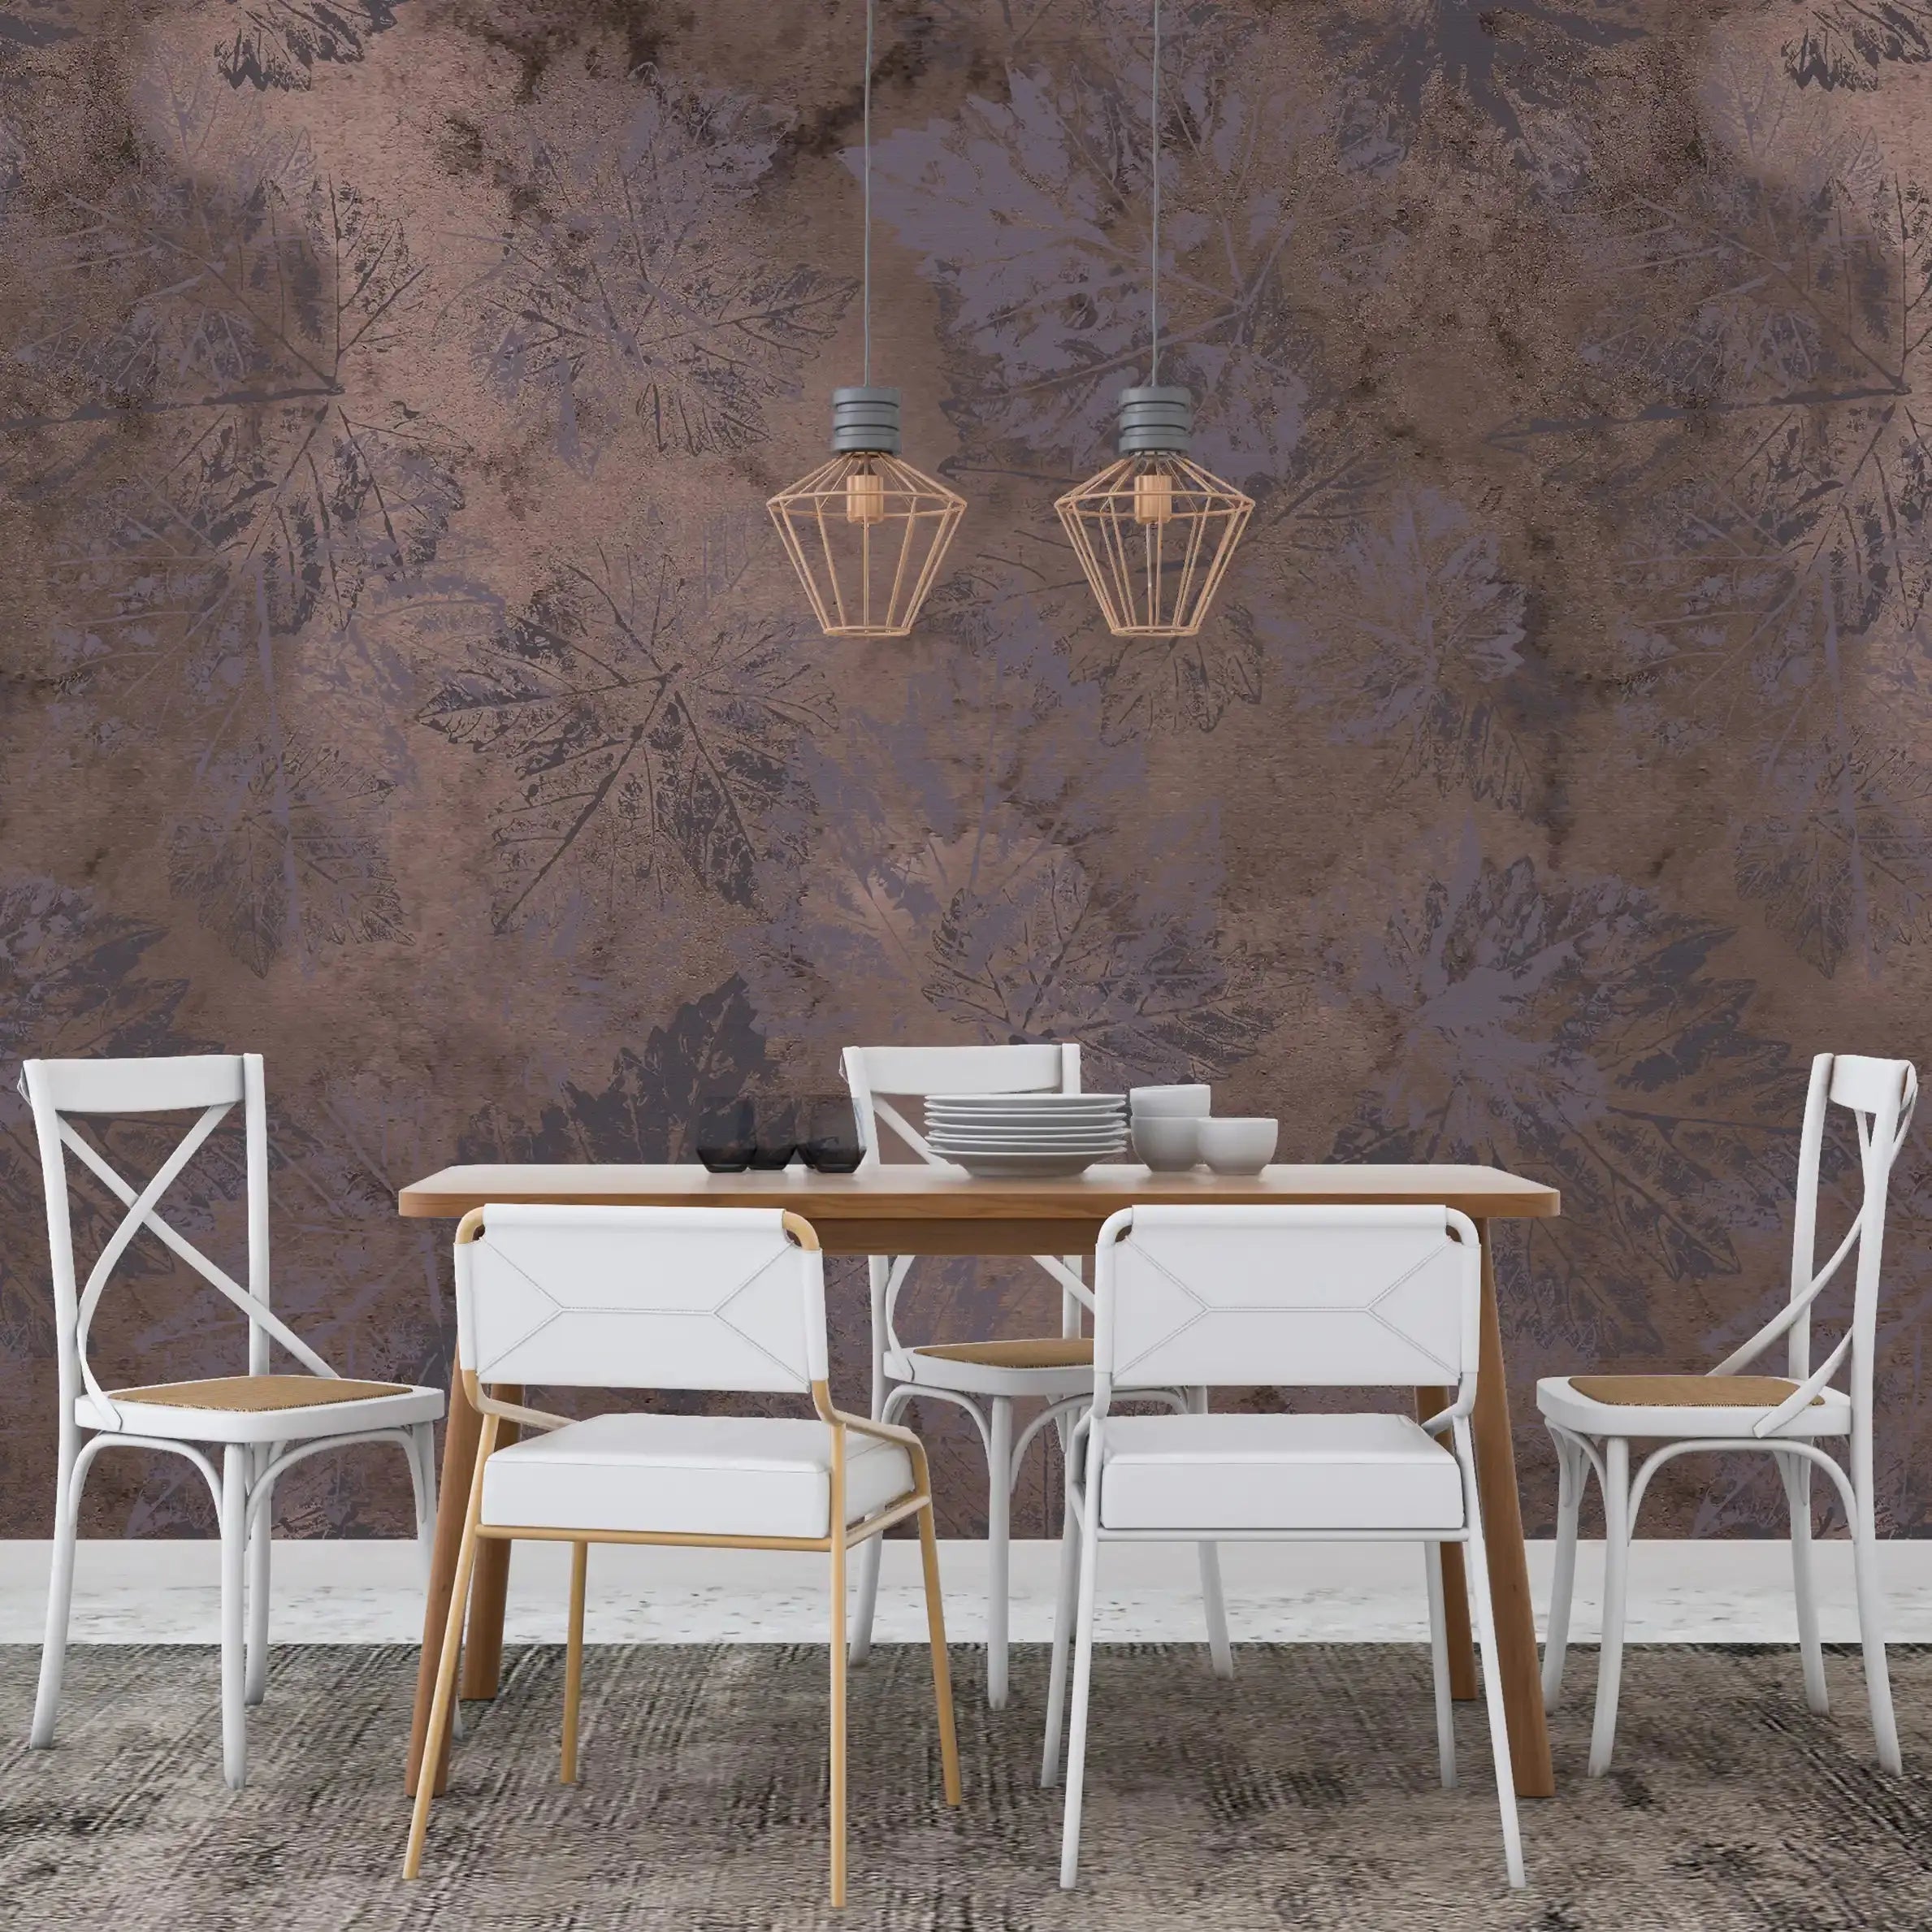 3072-A / Vintage Floral Mural Peel and Stick Wallpaper - Dark Brown Nature-Inspired Wall Decor for Modern Homes - Artevella